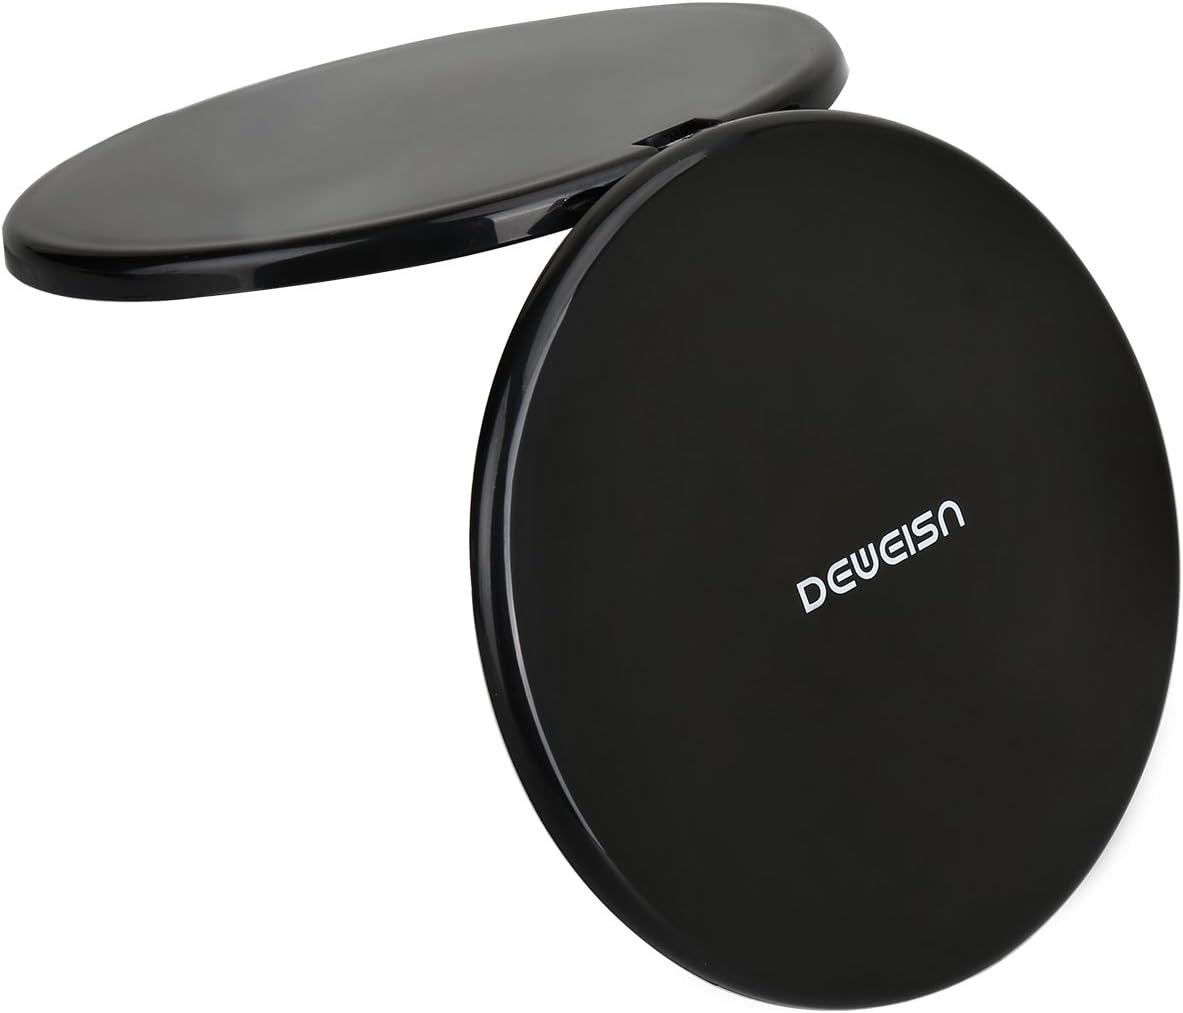 Magnifying Compact Cosmetic Mirror-DeWEISN Elegant Compact Pocket Makeup Mirror, Handheld Travel Makeup Mirror with Powerful 10x Magnification and 1x True View Mirror for Travel or Your Purse